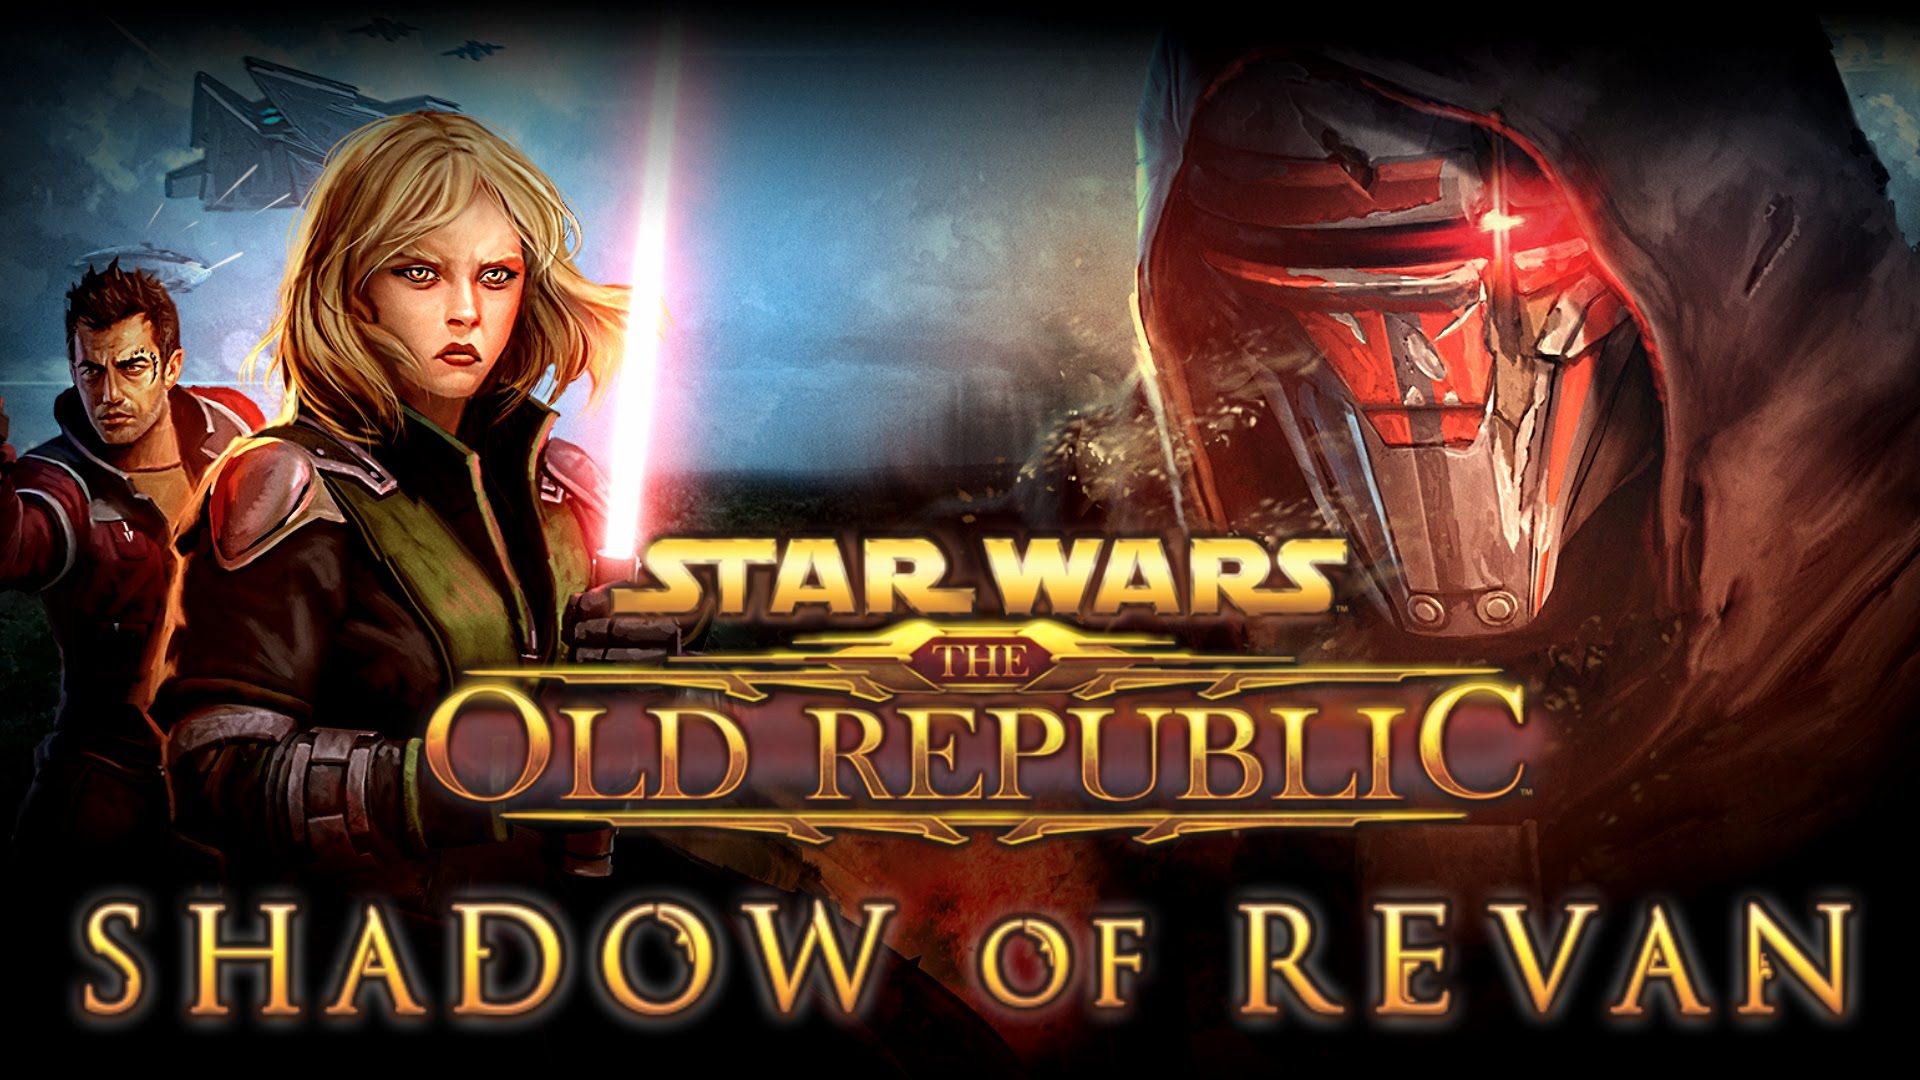 Shadow of Revan expansion